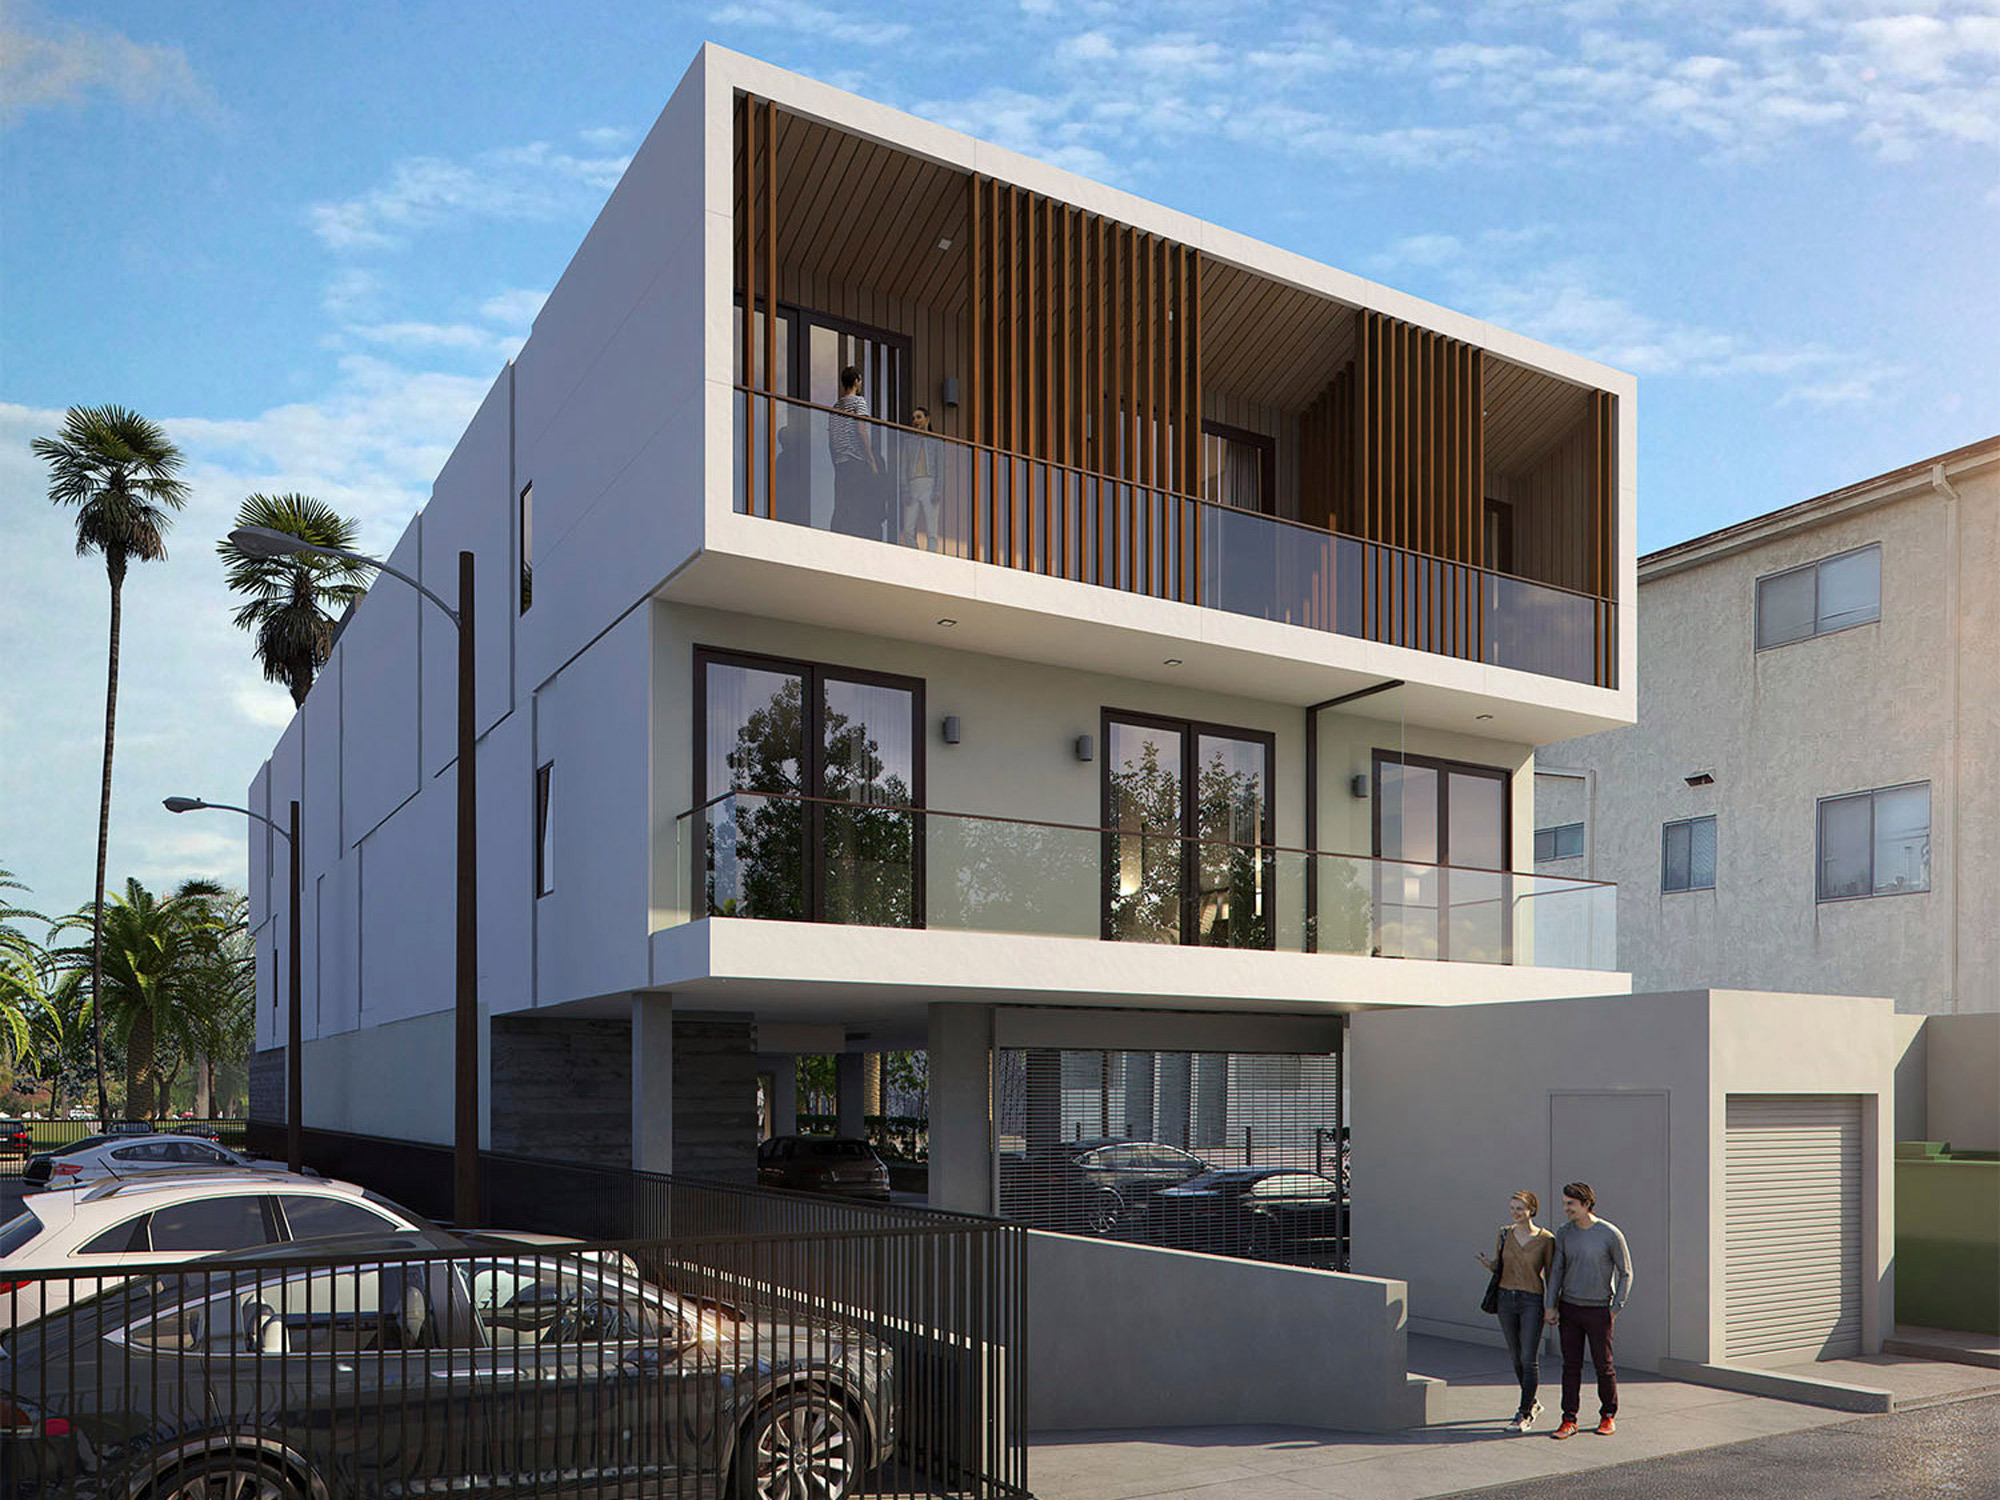 Modern two-story residential building with geometric lines, featuring a combination of clean white facade and warm wood paneling. Balconies with glass railings enhance the open design, while the landscaped entrance complements the structure's minimalist aesthetic.